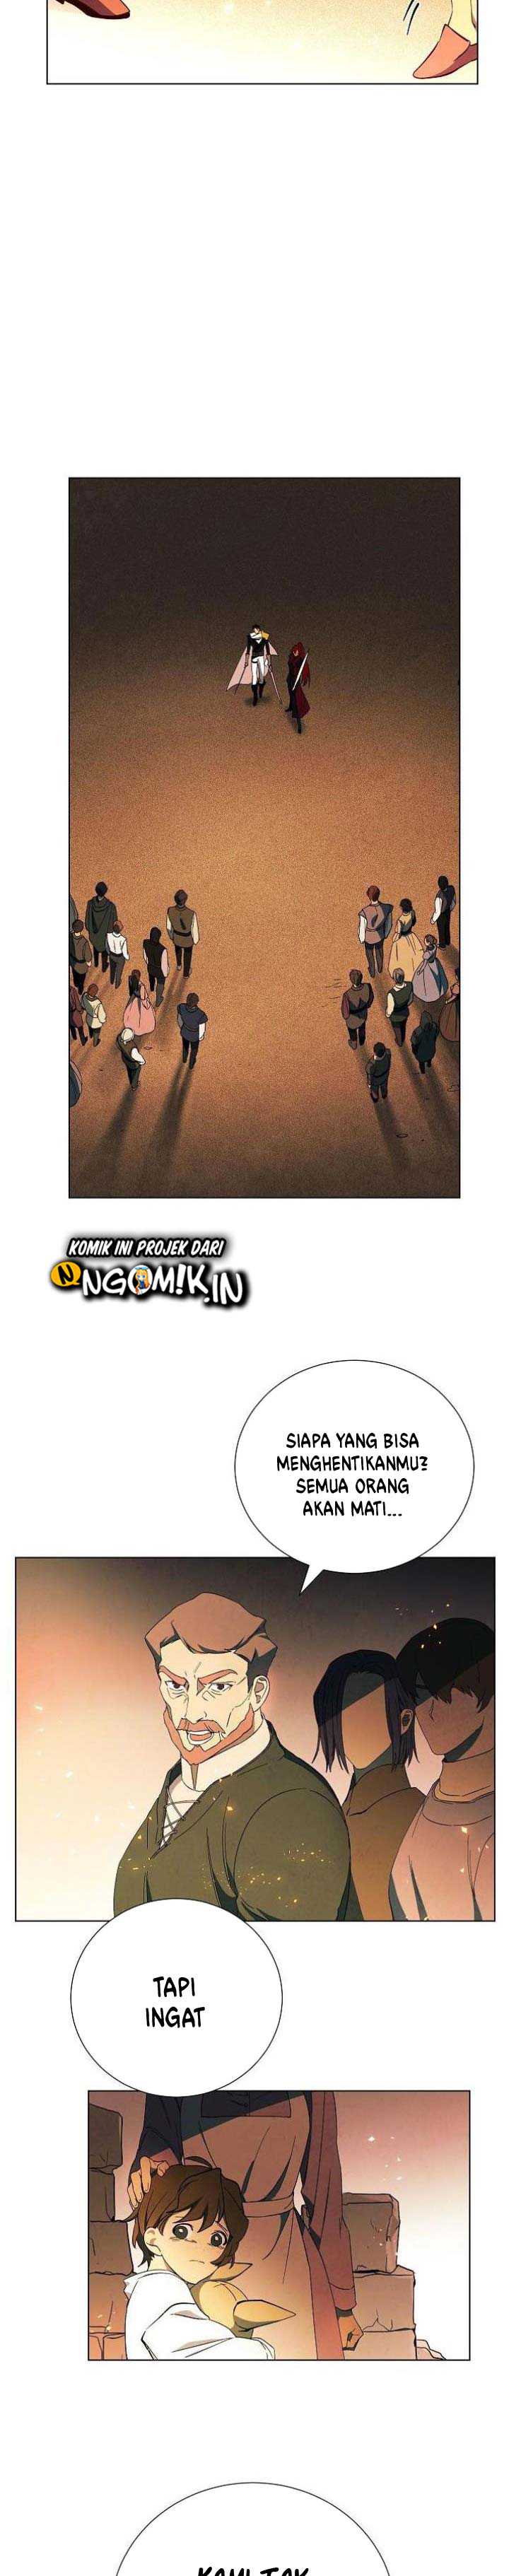 Seven Knights: Alkaid Chapter 4